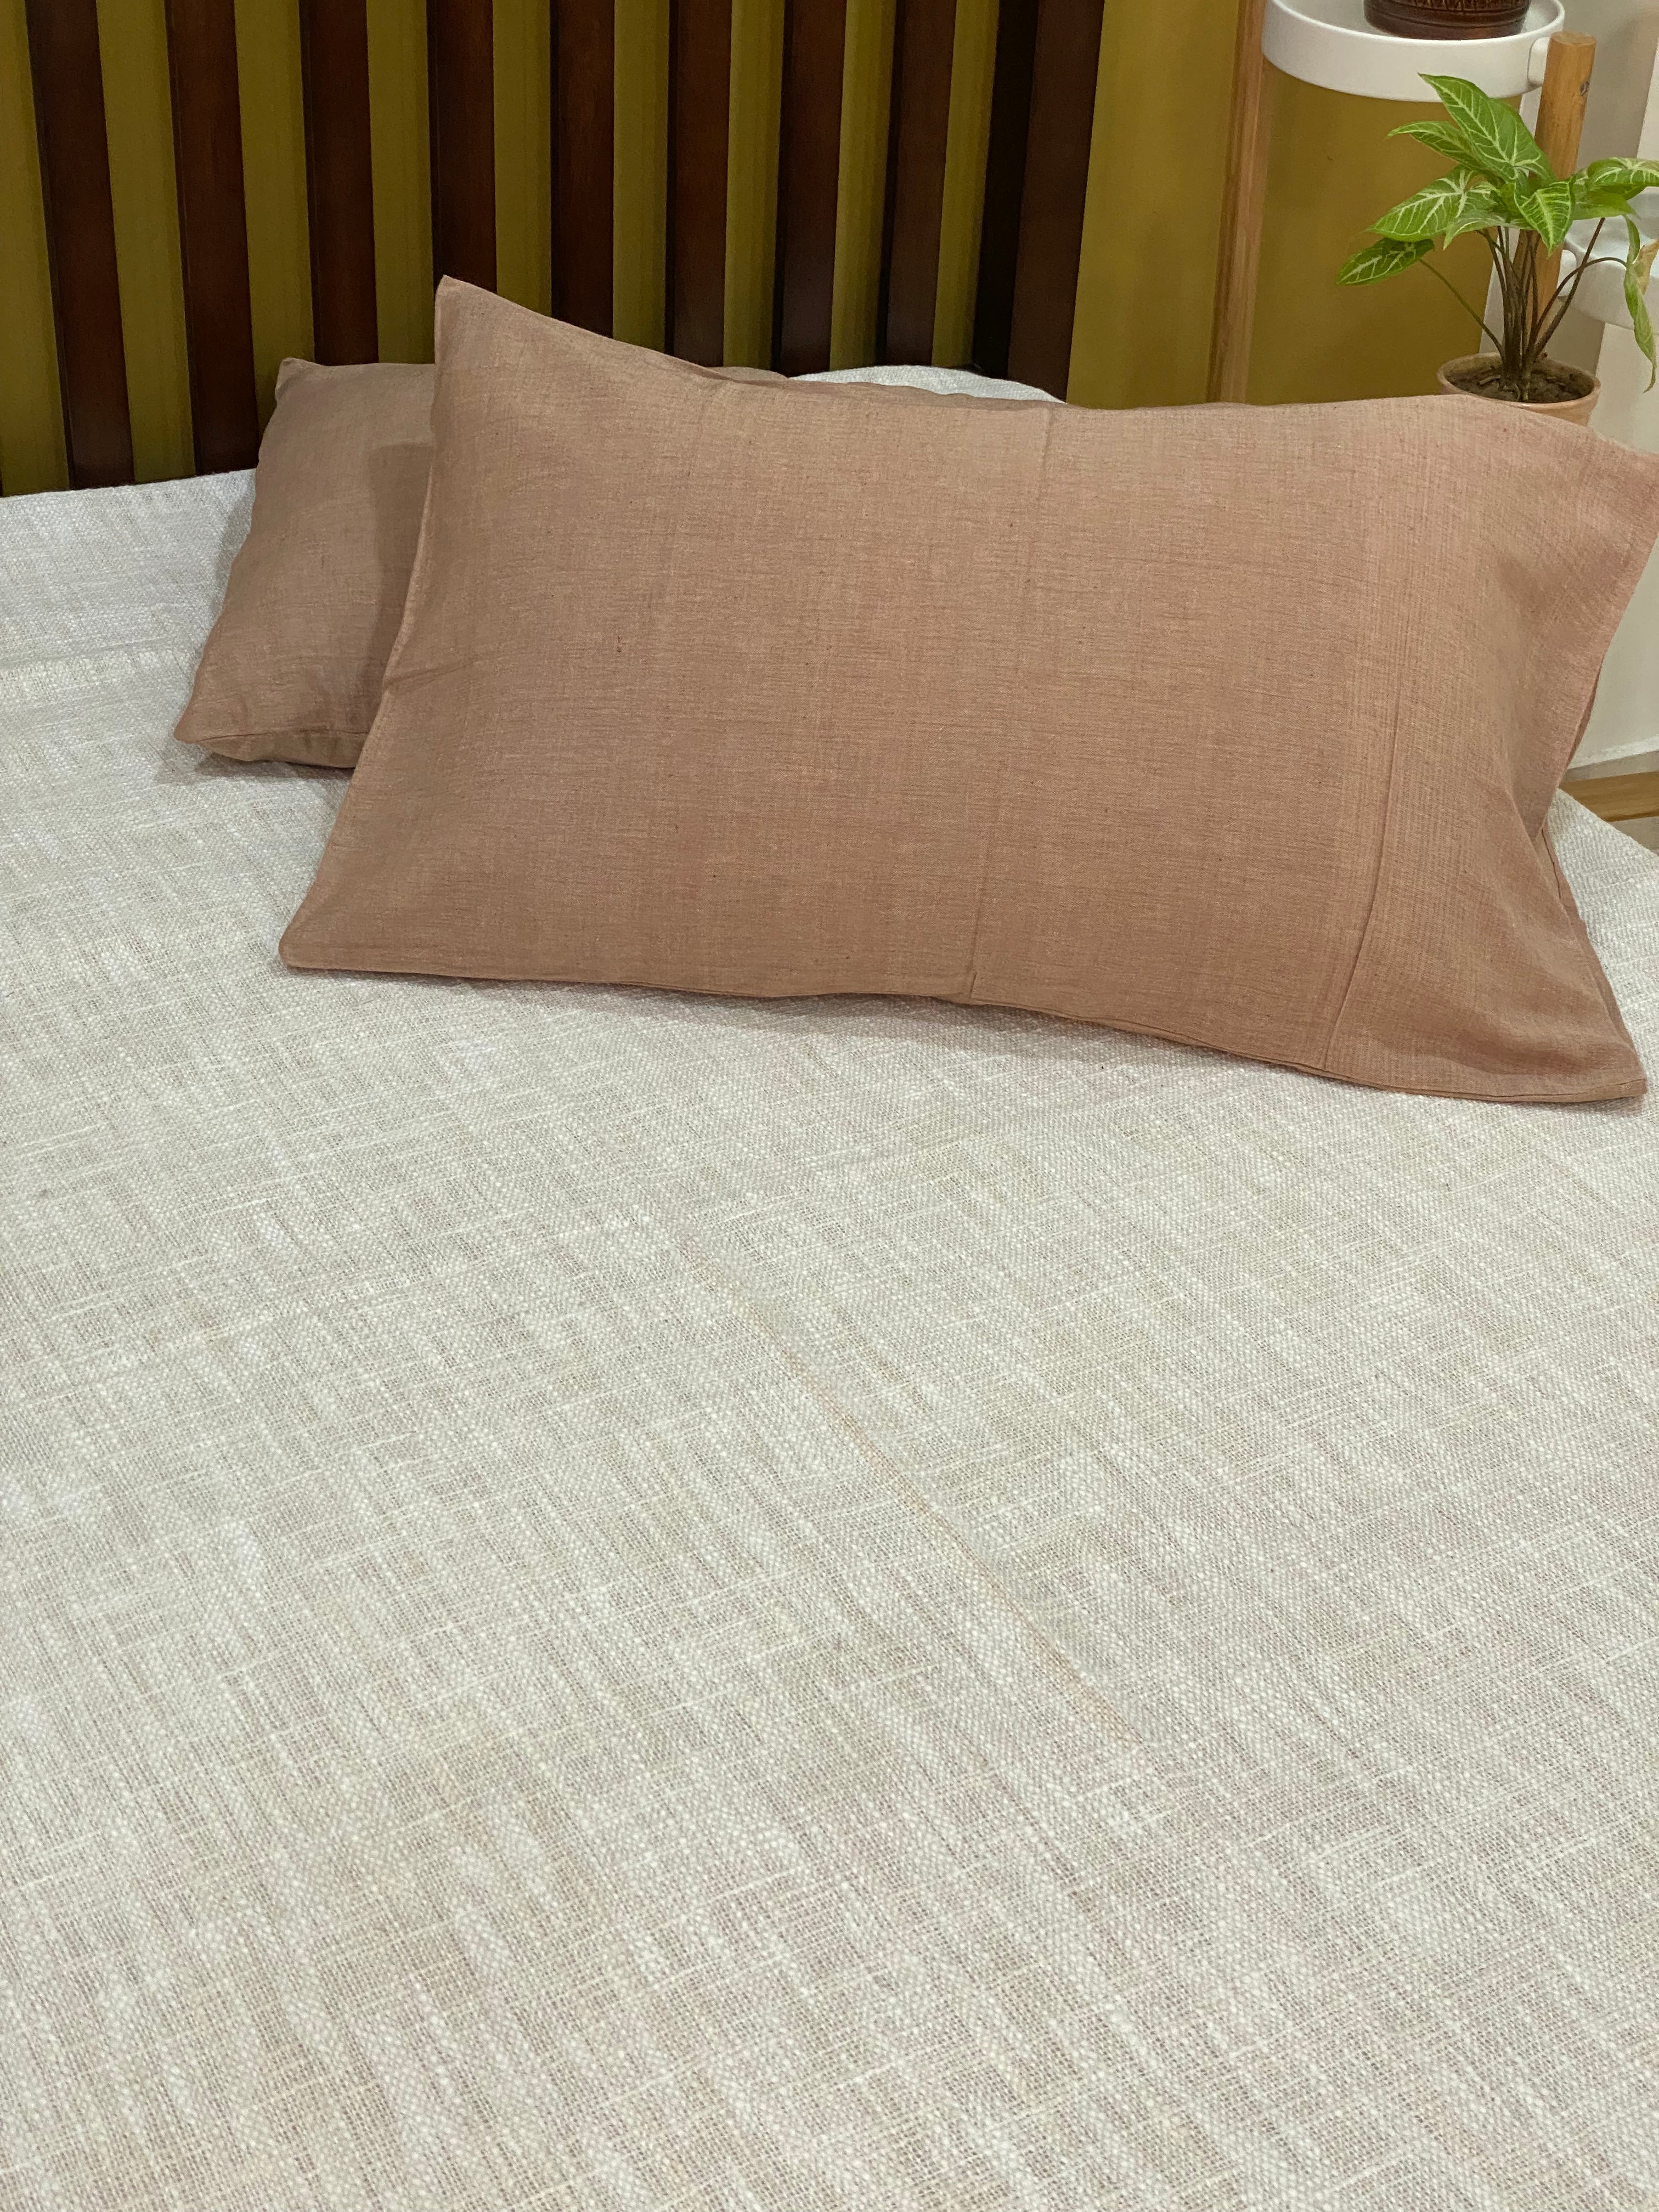 Pure Cotton Reversible Bedspread with 2 Pillow Cases- Queen Size